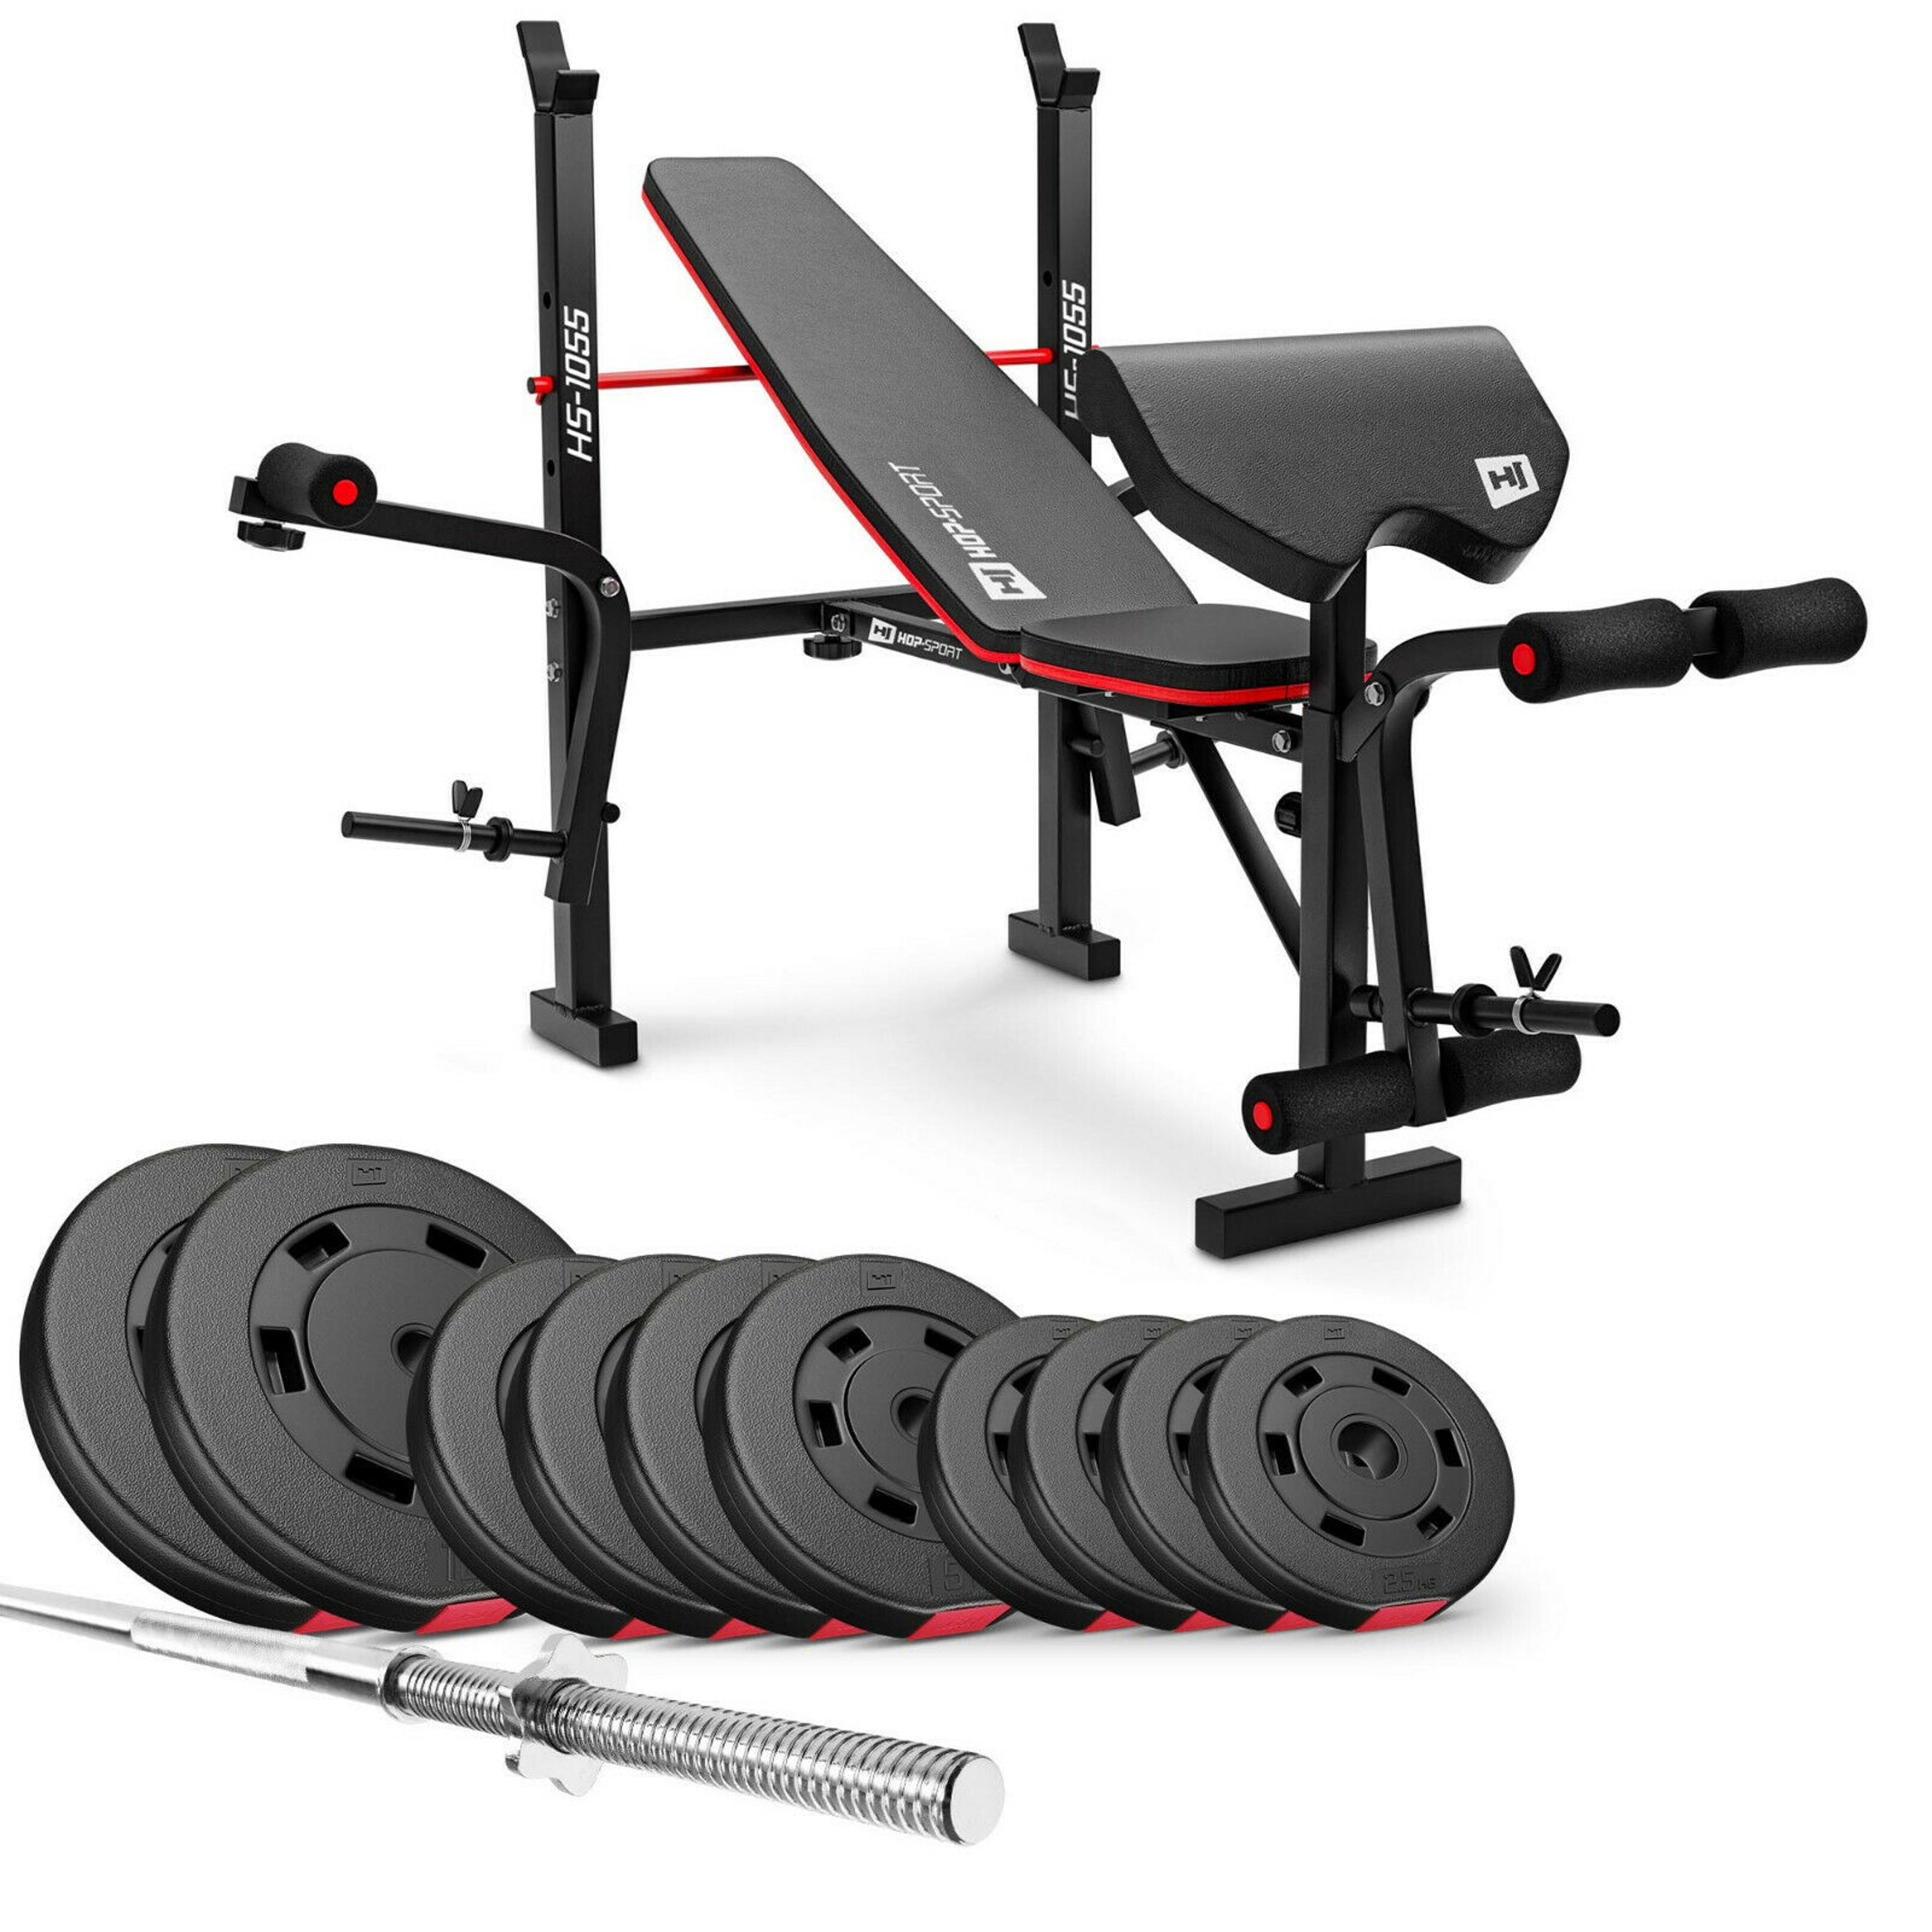 Premium 59 kg Barbell Set with HS-1055 Weight Bench